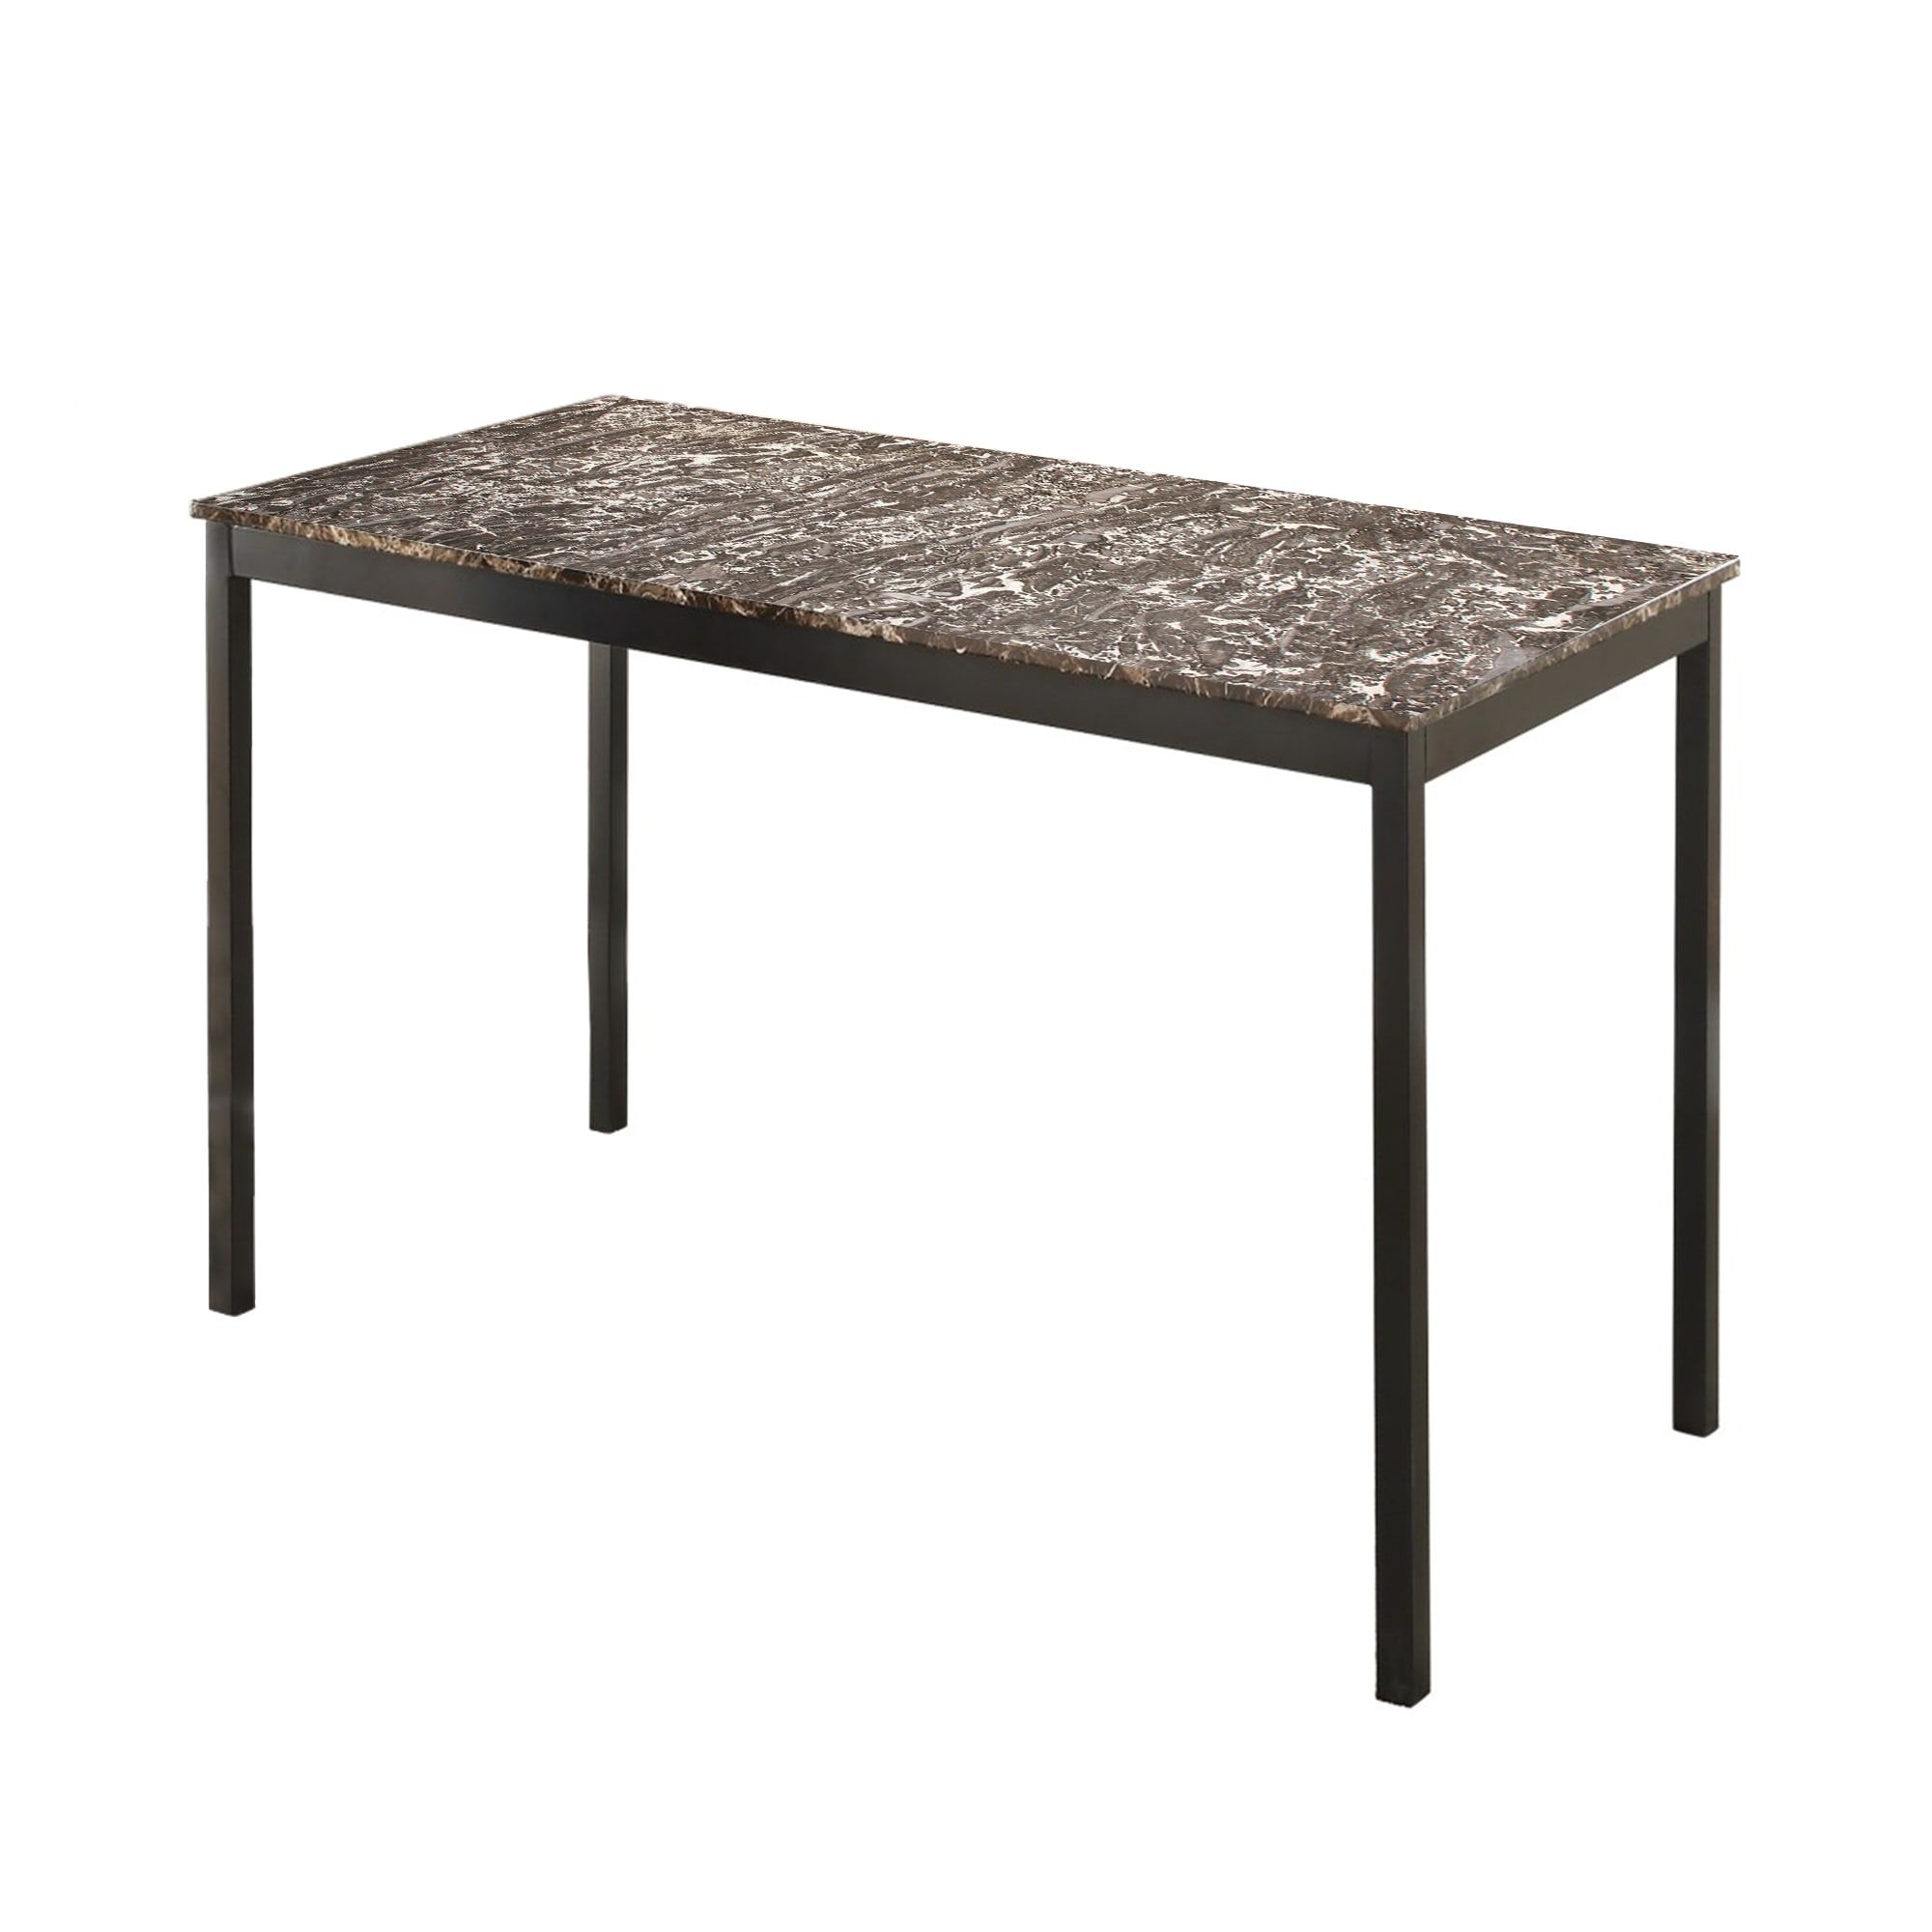 2018 Faux Marble Writing Desk With Leatherette Upholstered Metal Chair, Bla For Brown Faux Marble Writing Desks (View 2 of 15)